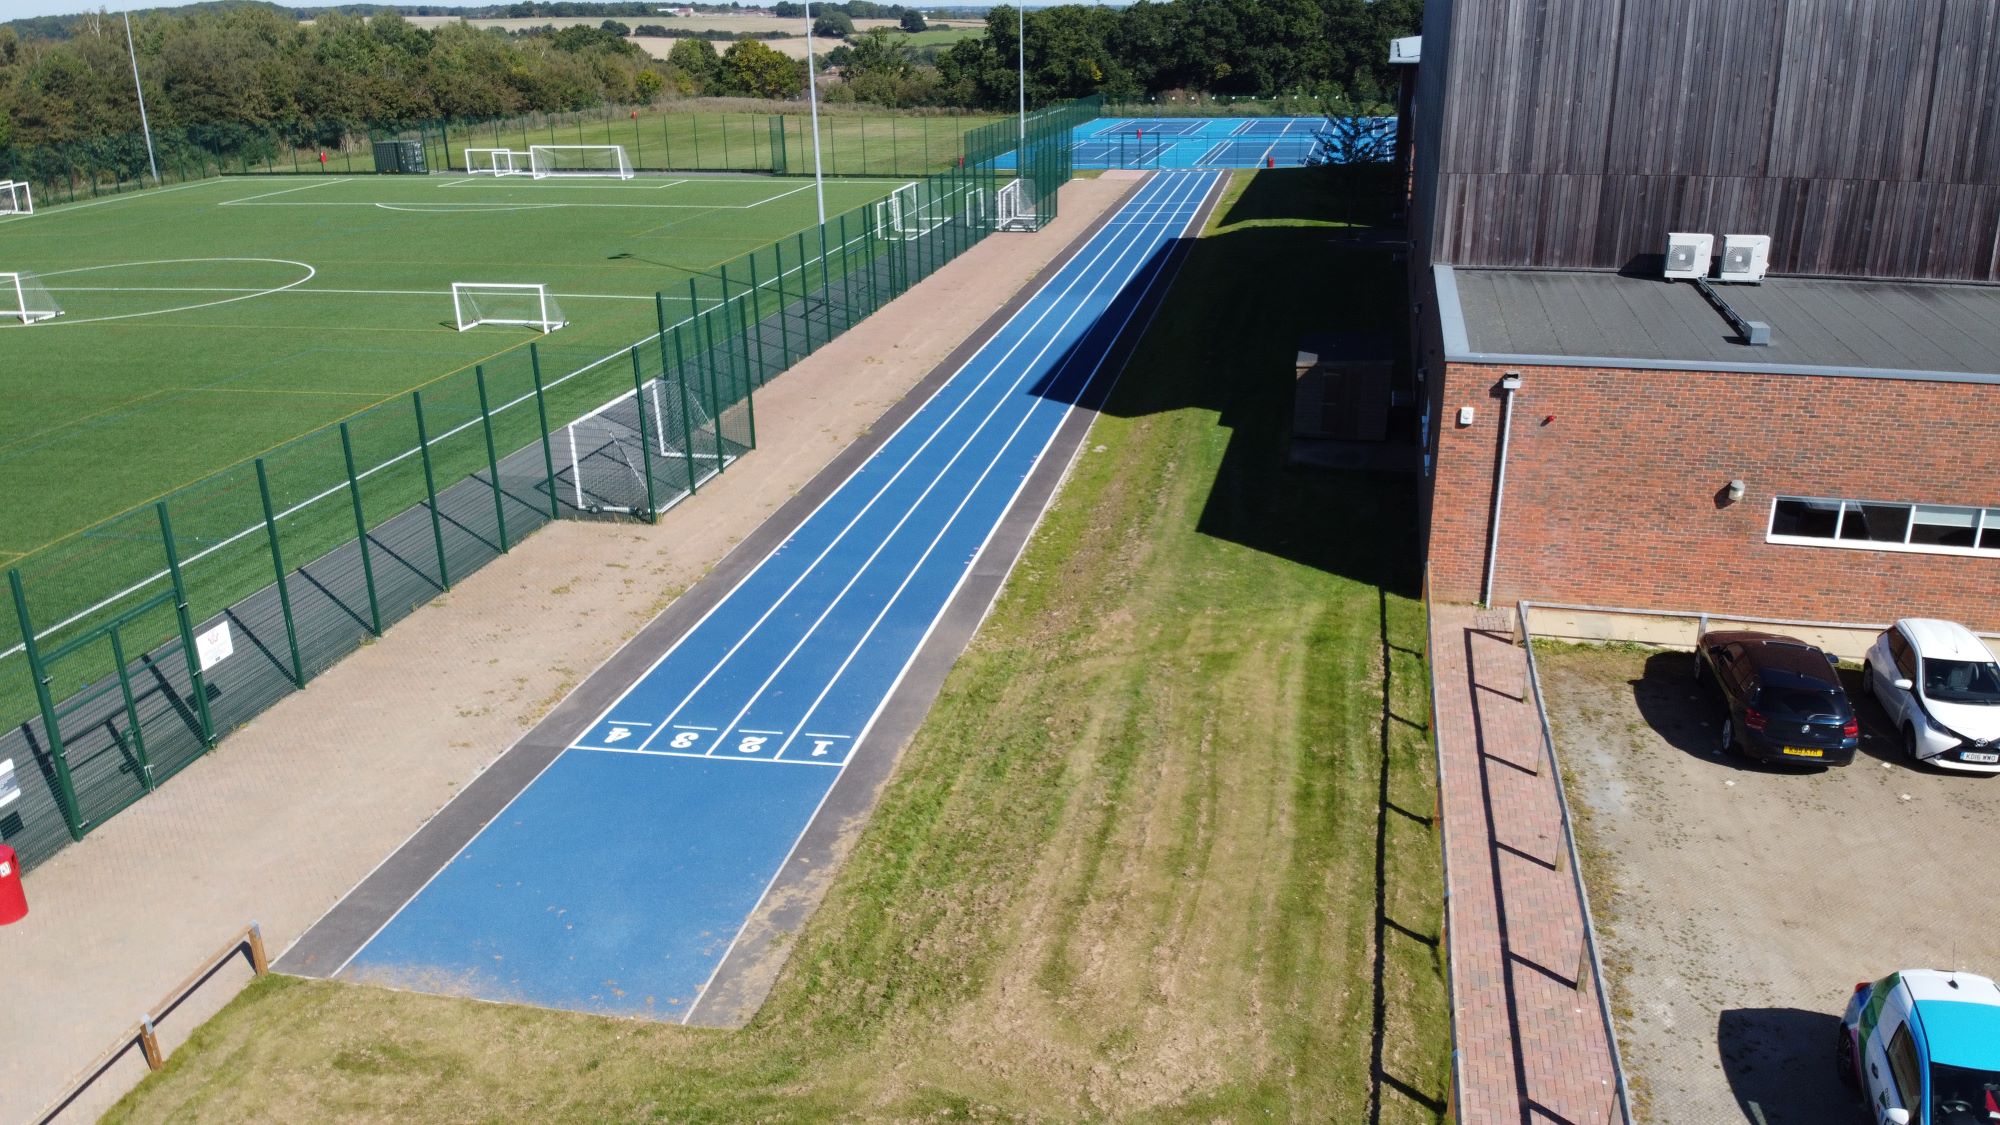 Installation of a new 110 ft four lane athletics track and MUGA for Sandringham school in Hertfordshire.